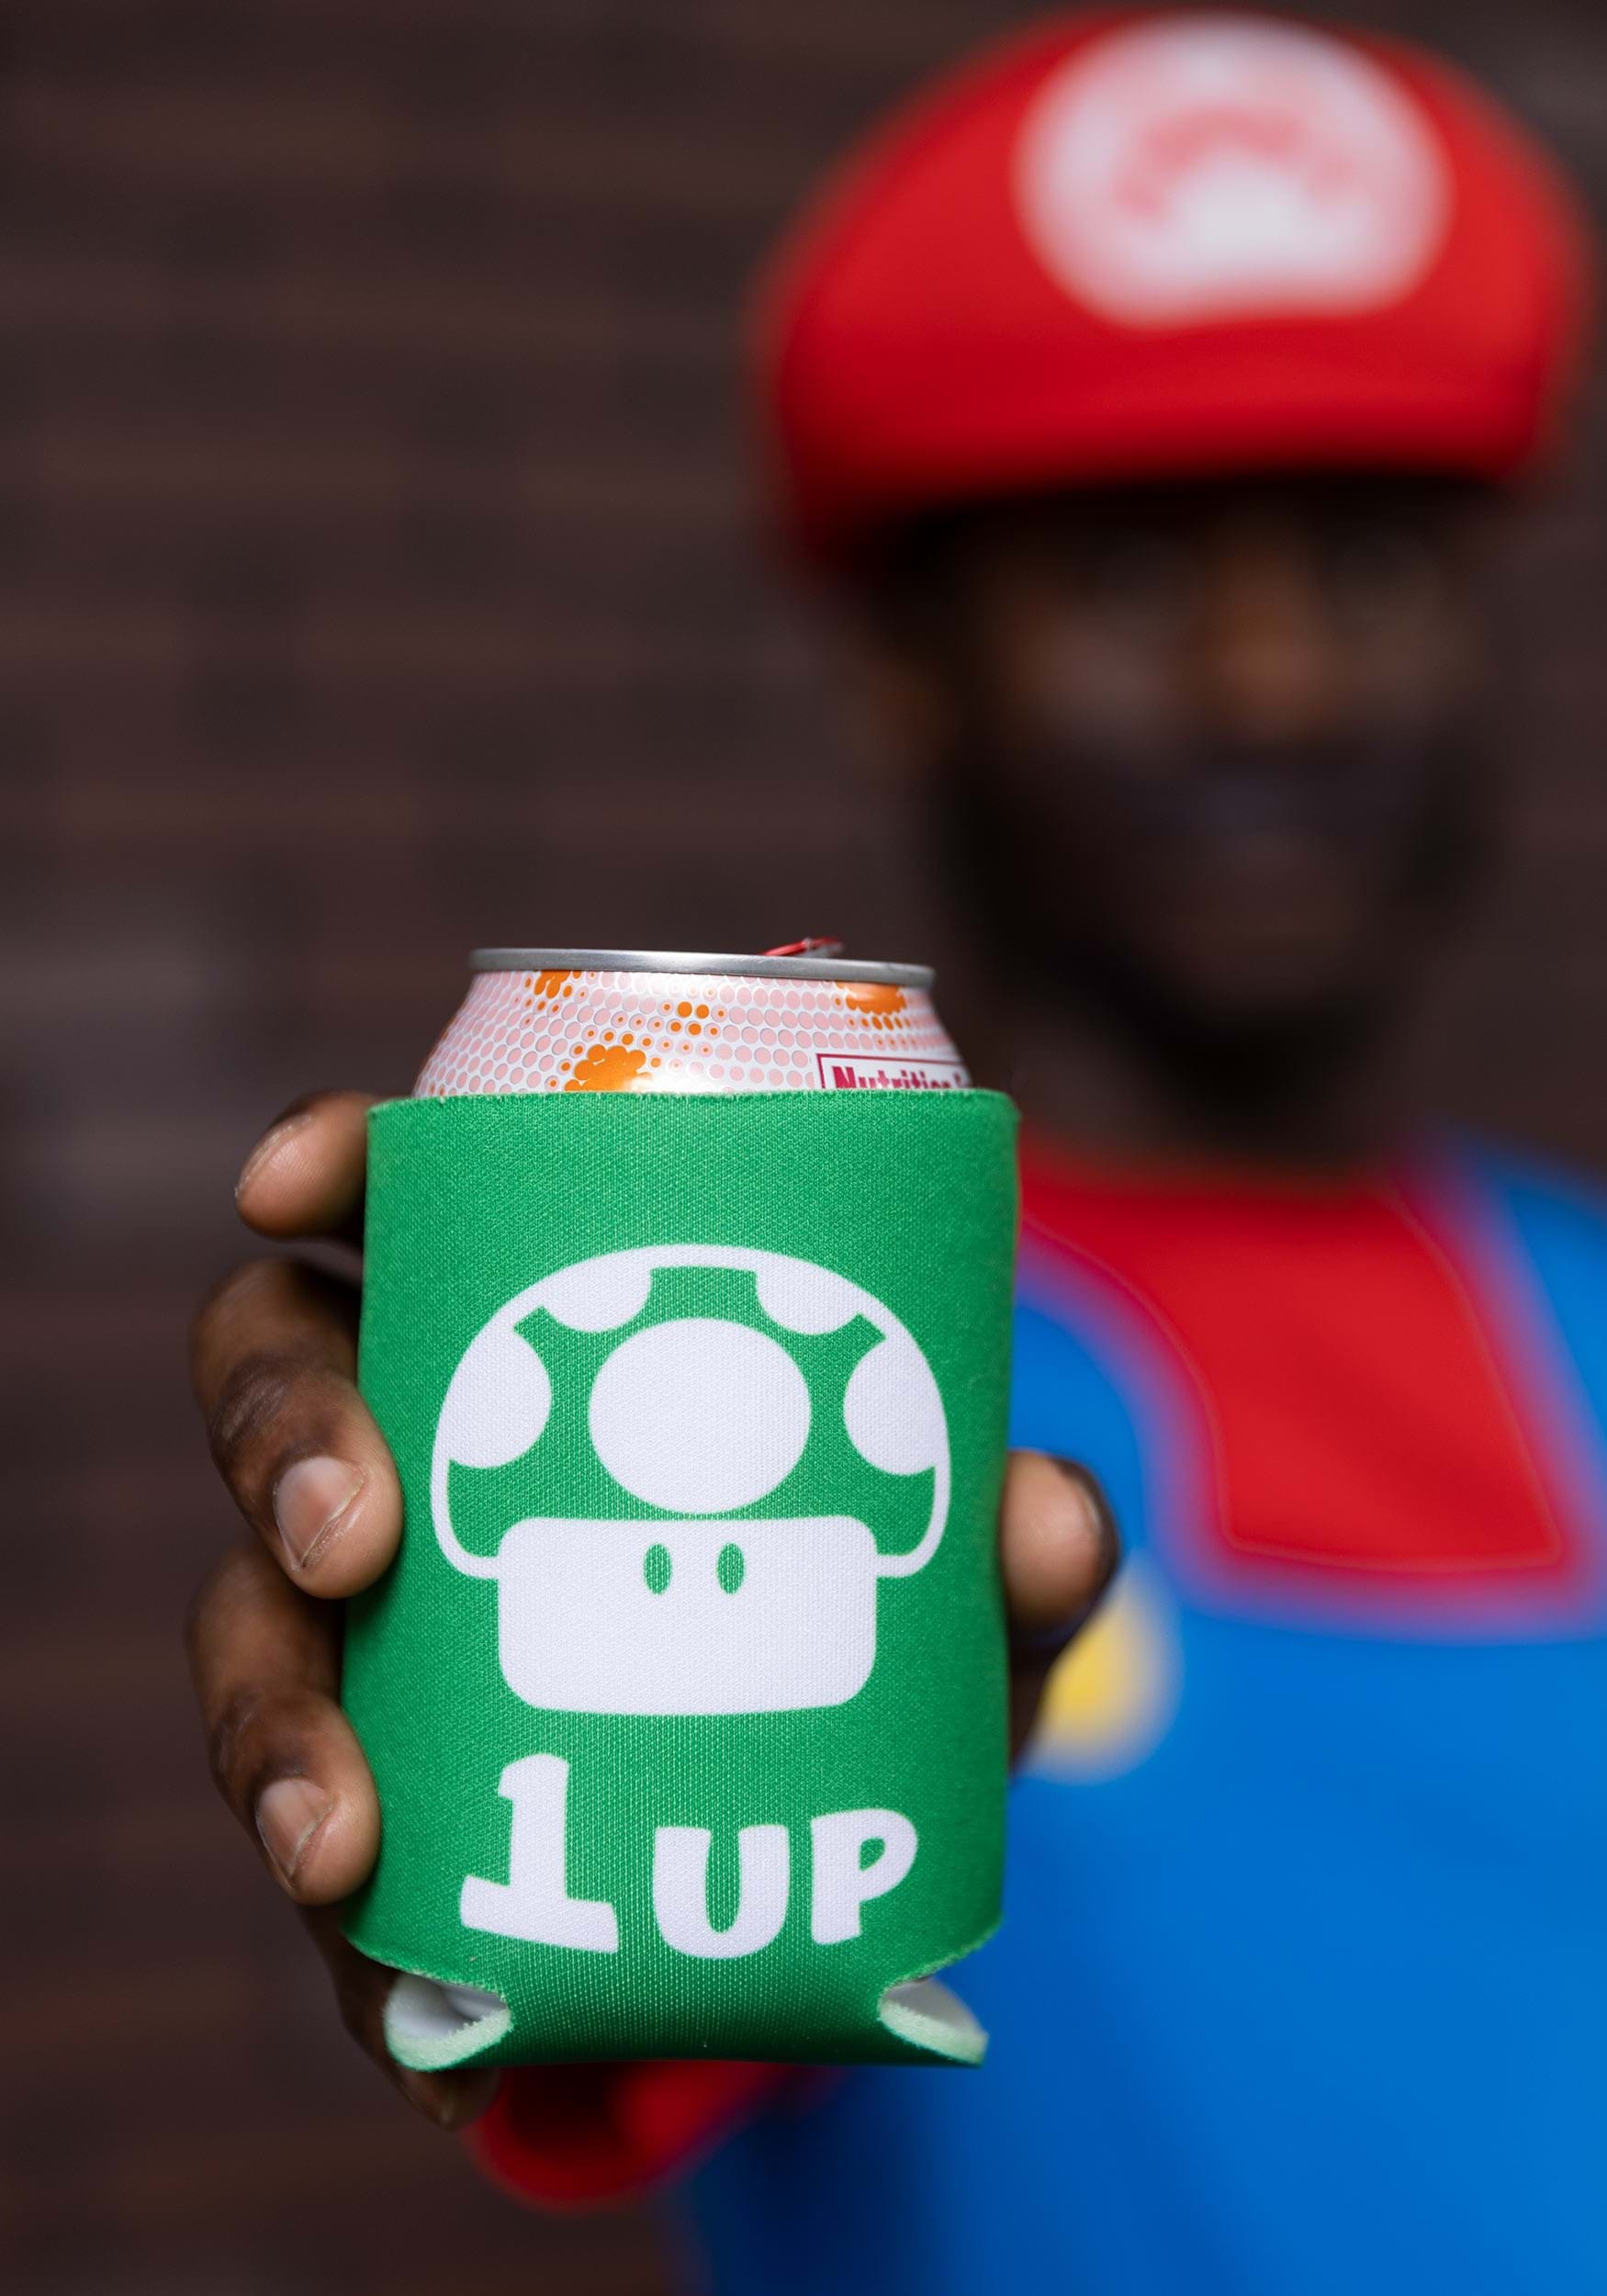 https://images.halloweencostumes.com/products/4772/1-1/1-up-mario-can-cooler-upd-1-1.jpg